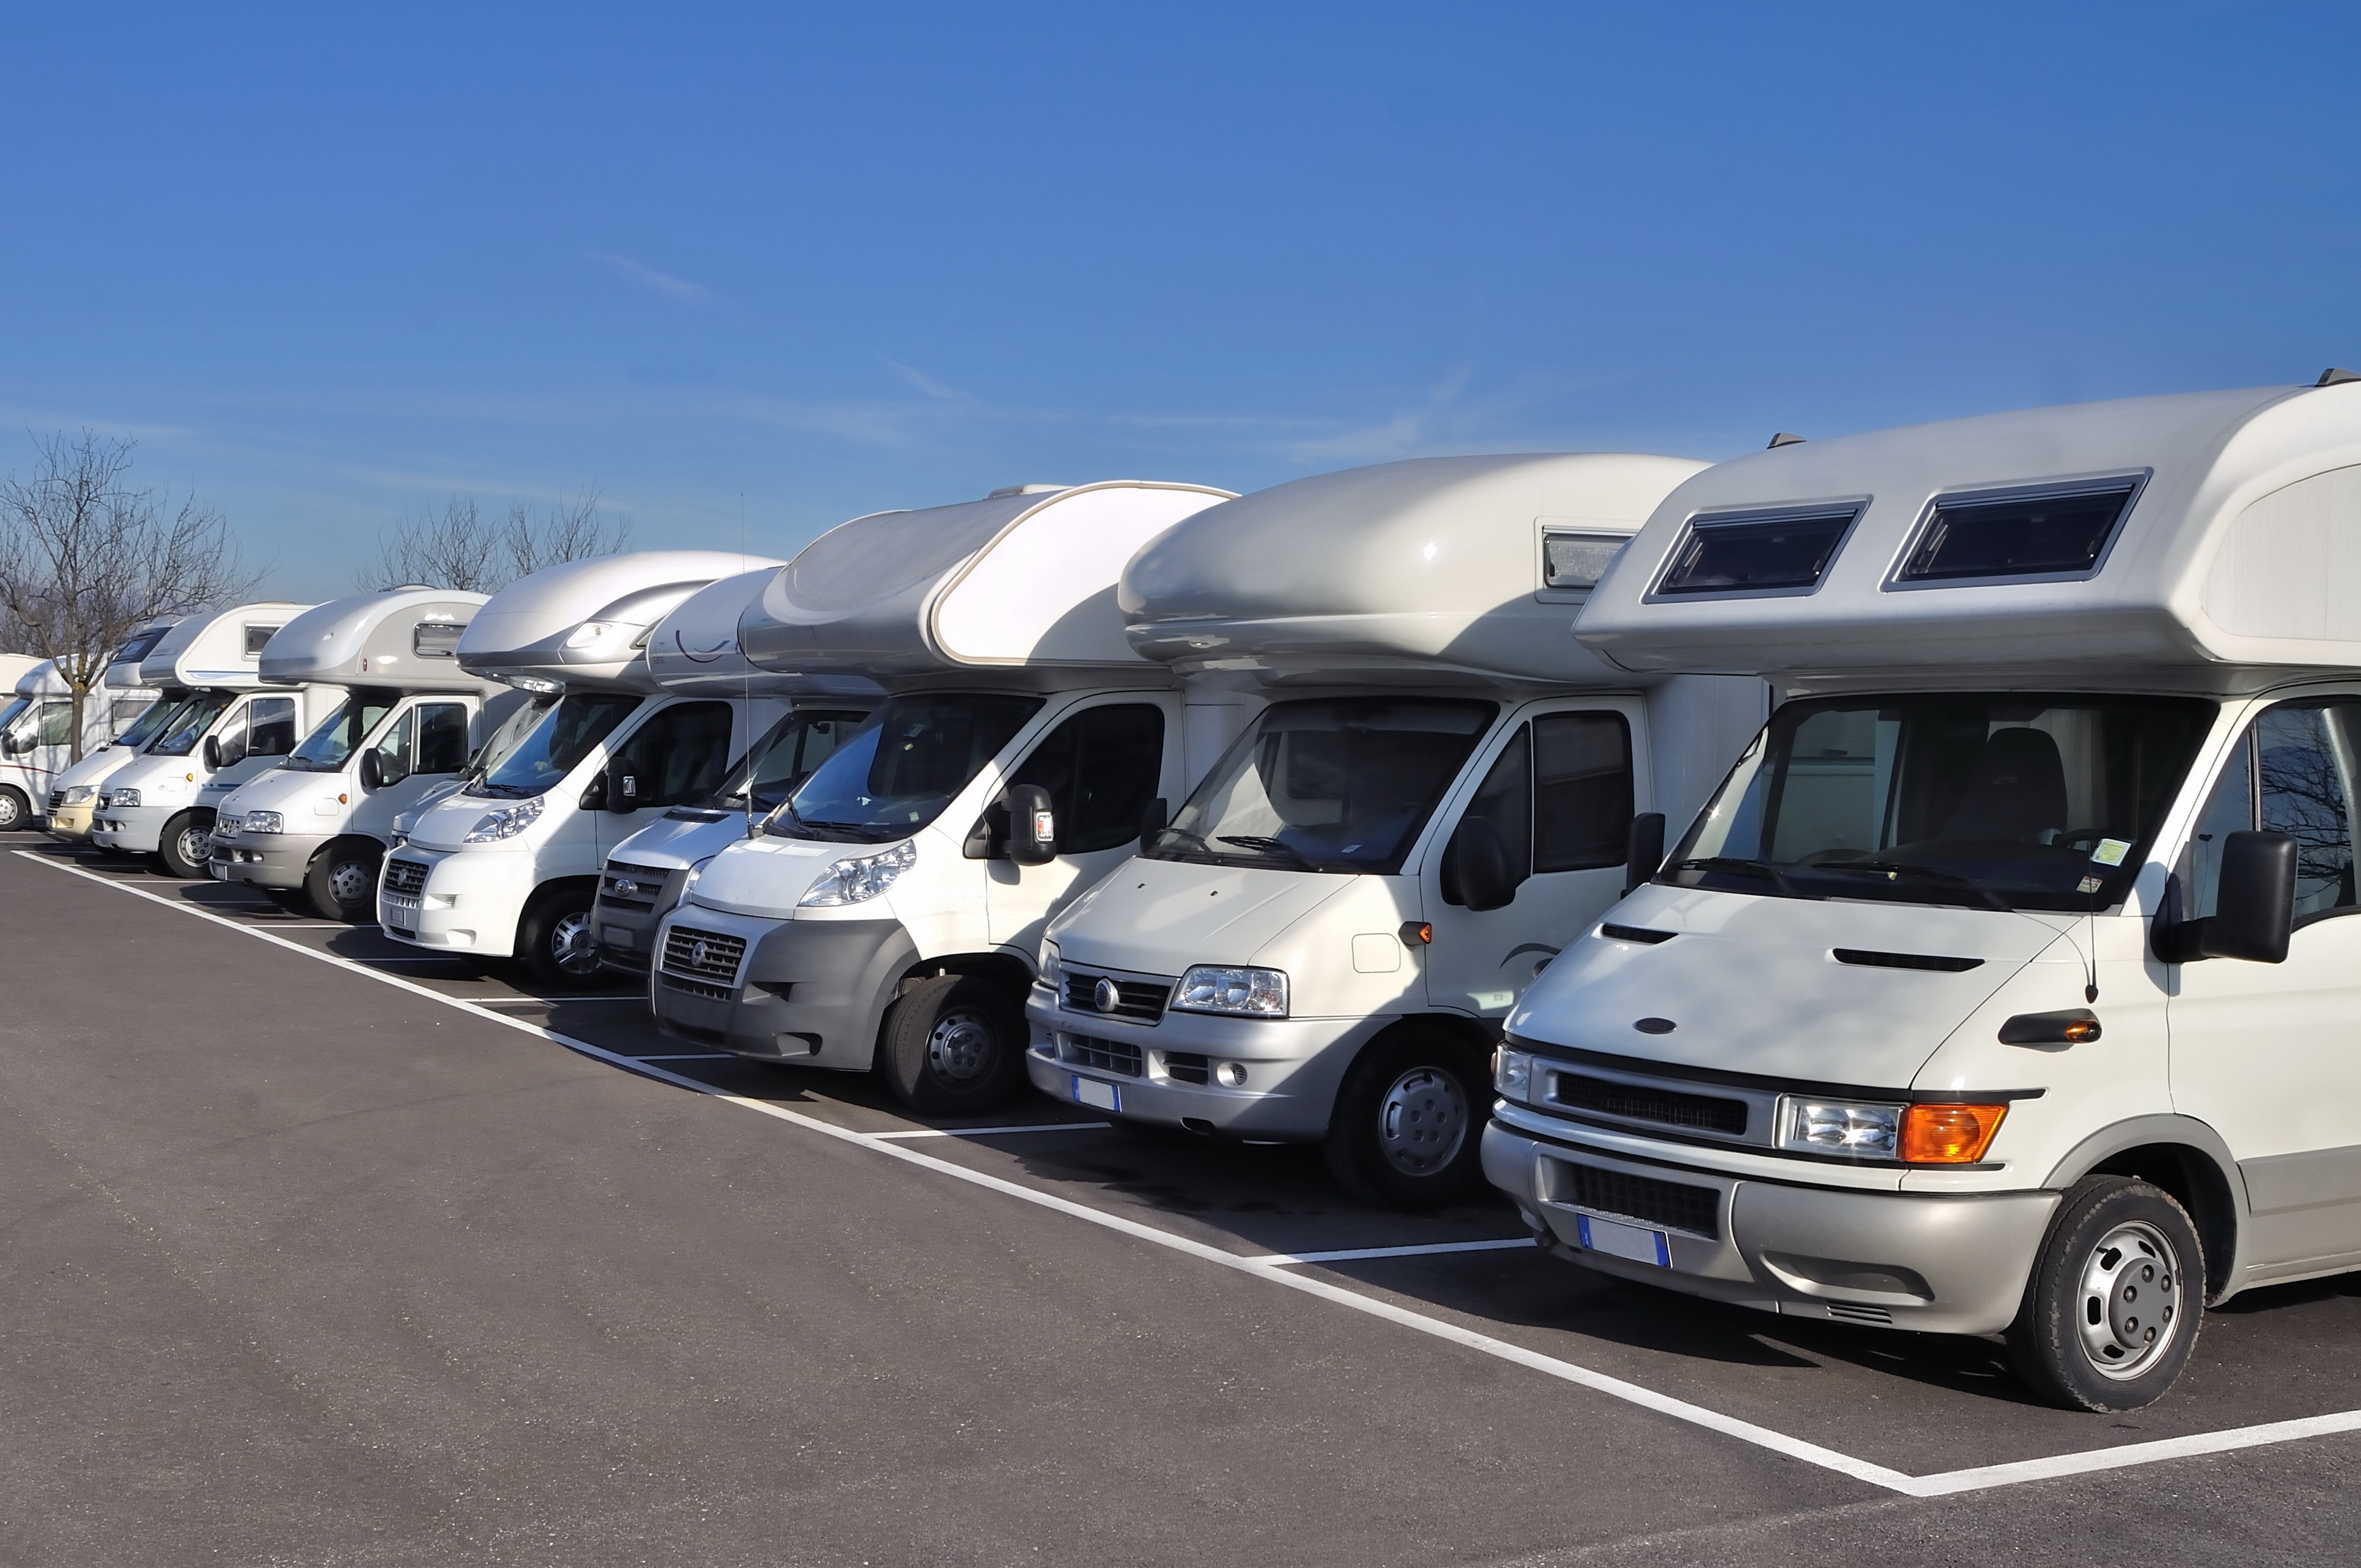 Stouchsburg Storage - Outdoor RV and Vehicle Parking in Womelsdorf, PA